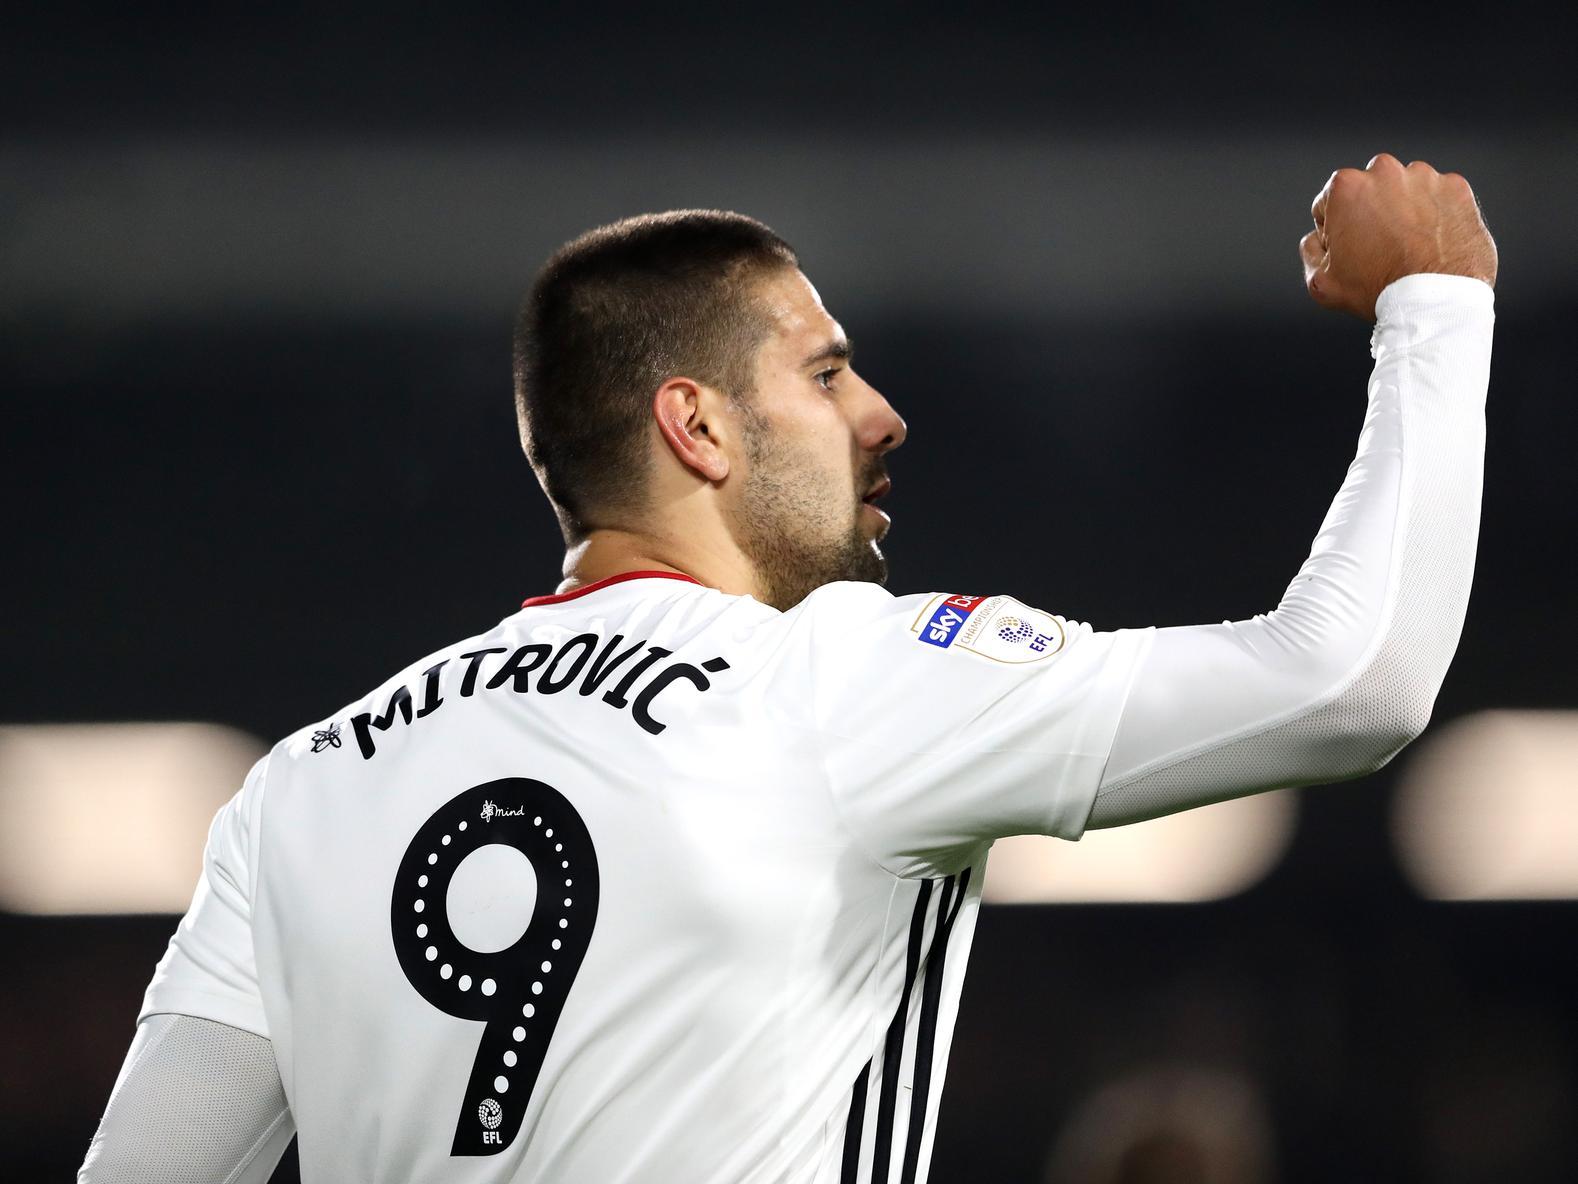 Struggling Serie A side Genoa are rumoured to be plotting a move for Fulham striker Aleksandar Mitrovic, but could be put off by the Cottagers reported 20m valuation. (Calciomercato)